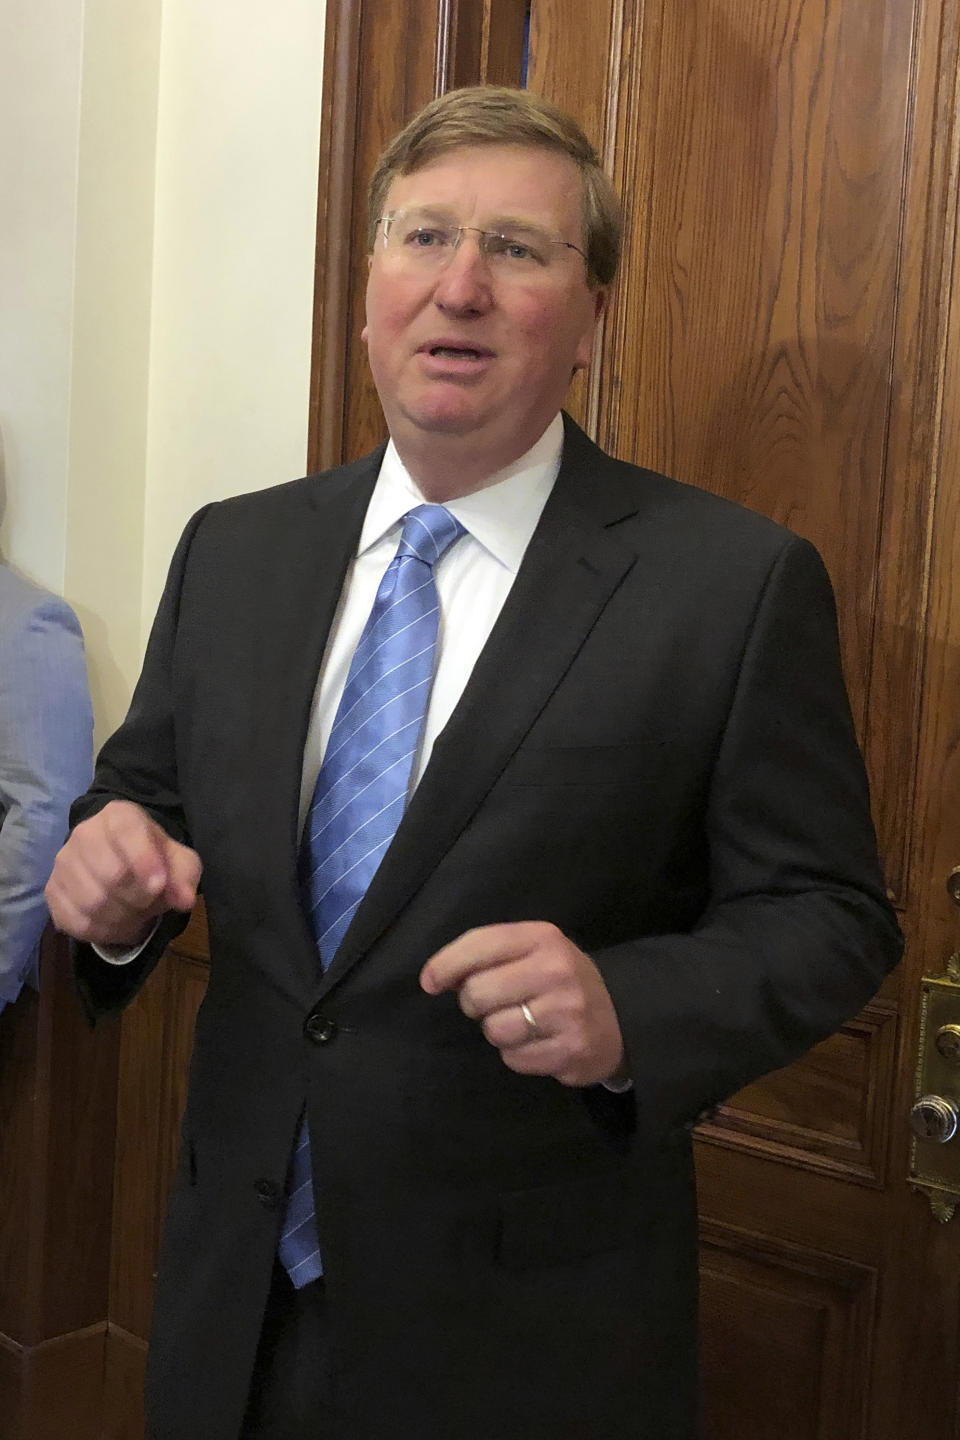 Mississippi Gov. Tate Reeves speaks Thursday, March 24, 2022, during a news conference outside his Capitol office in Jackson, Miss. The Republican says he wants legislators to phase out the state income tax. (AP Photo/Emily Wagster Pettus)